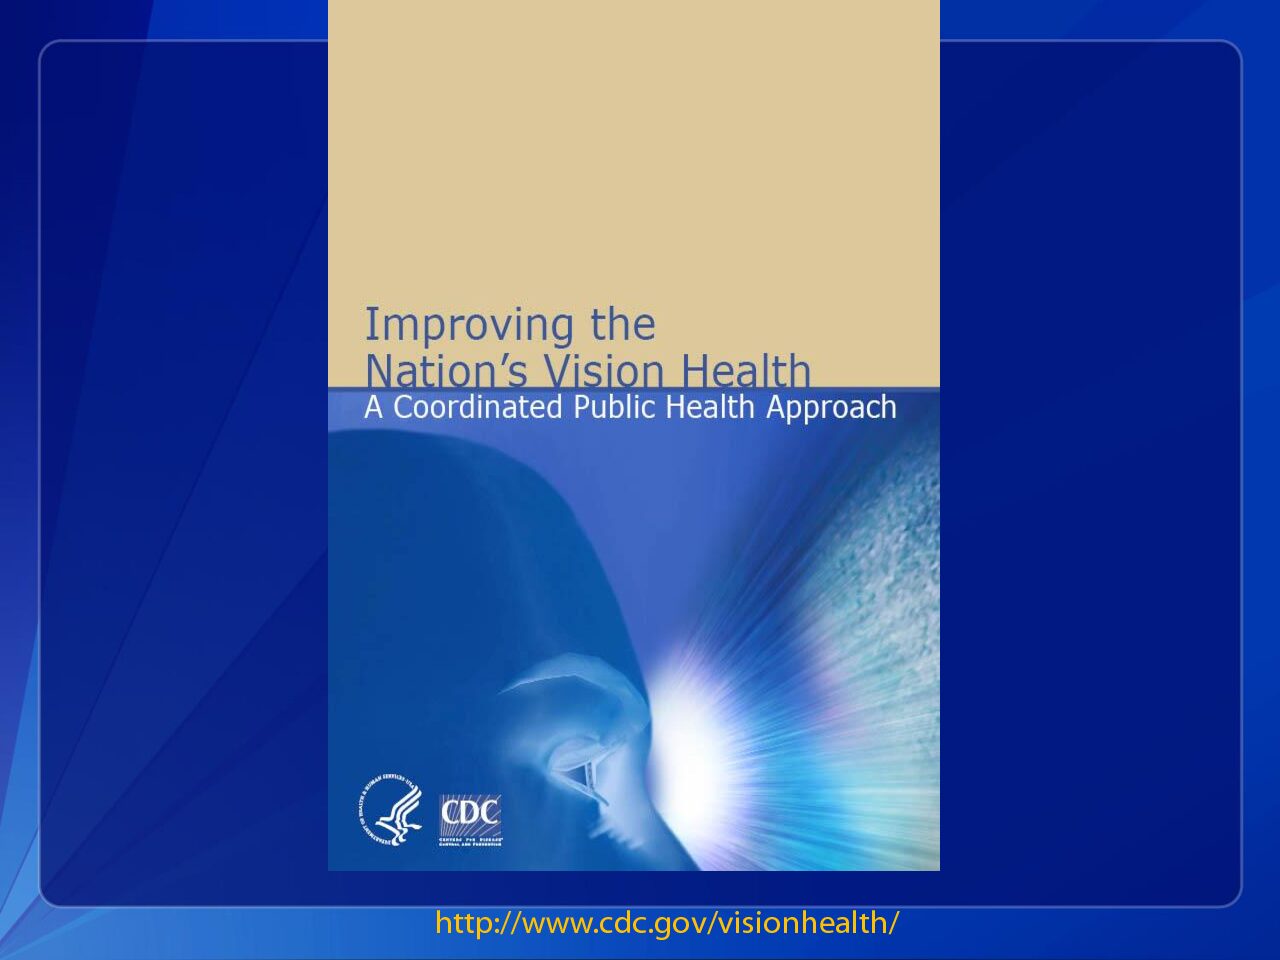 Improving the Nation’s Vision Health: A Coordinated Public Health Approach